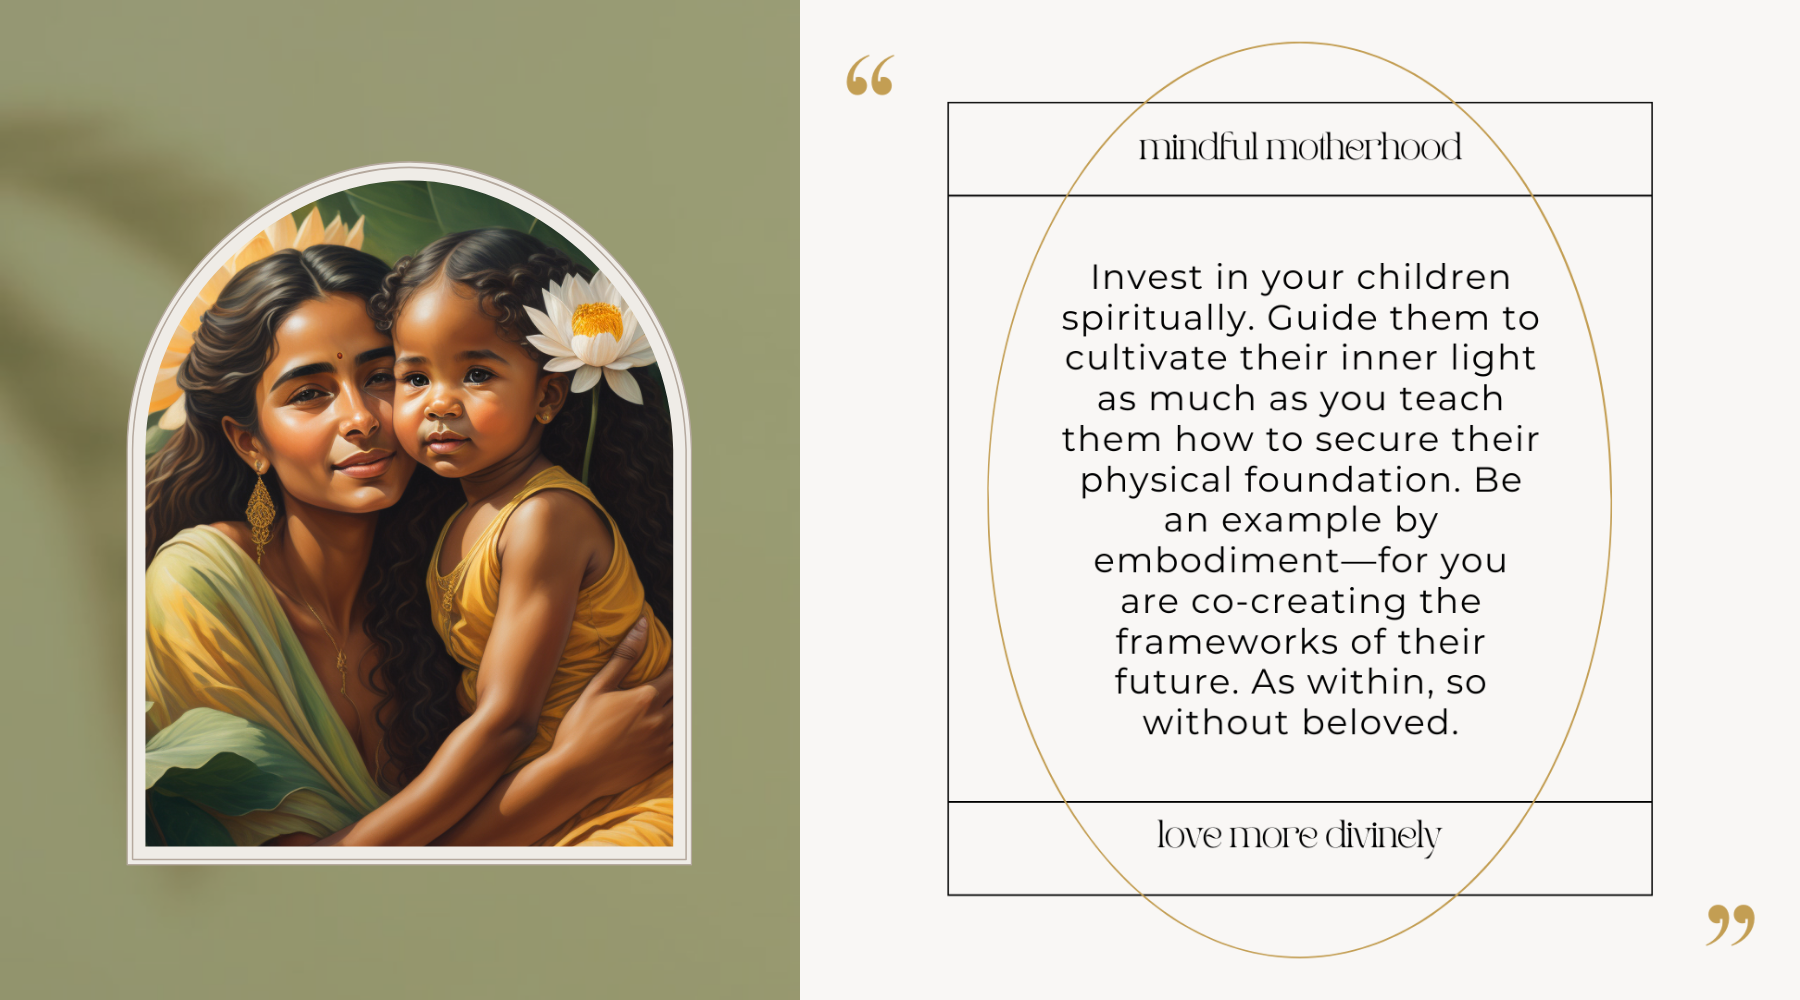 Image of Mindful Motherhood: A serene moment of a mother and child engaged in a heartwarming interaction, surrounded by soothing colors and elements that symbolize mindfulness and nurturing.